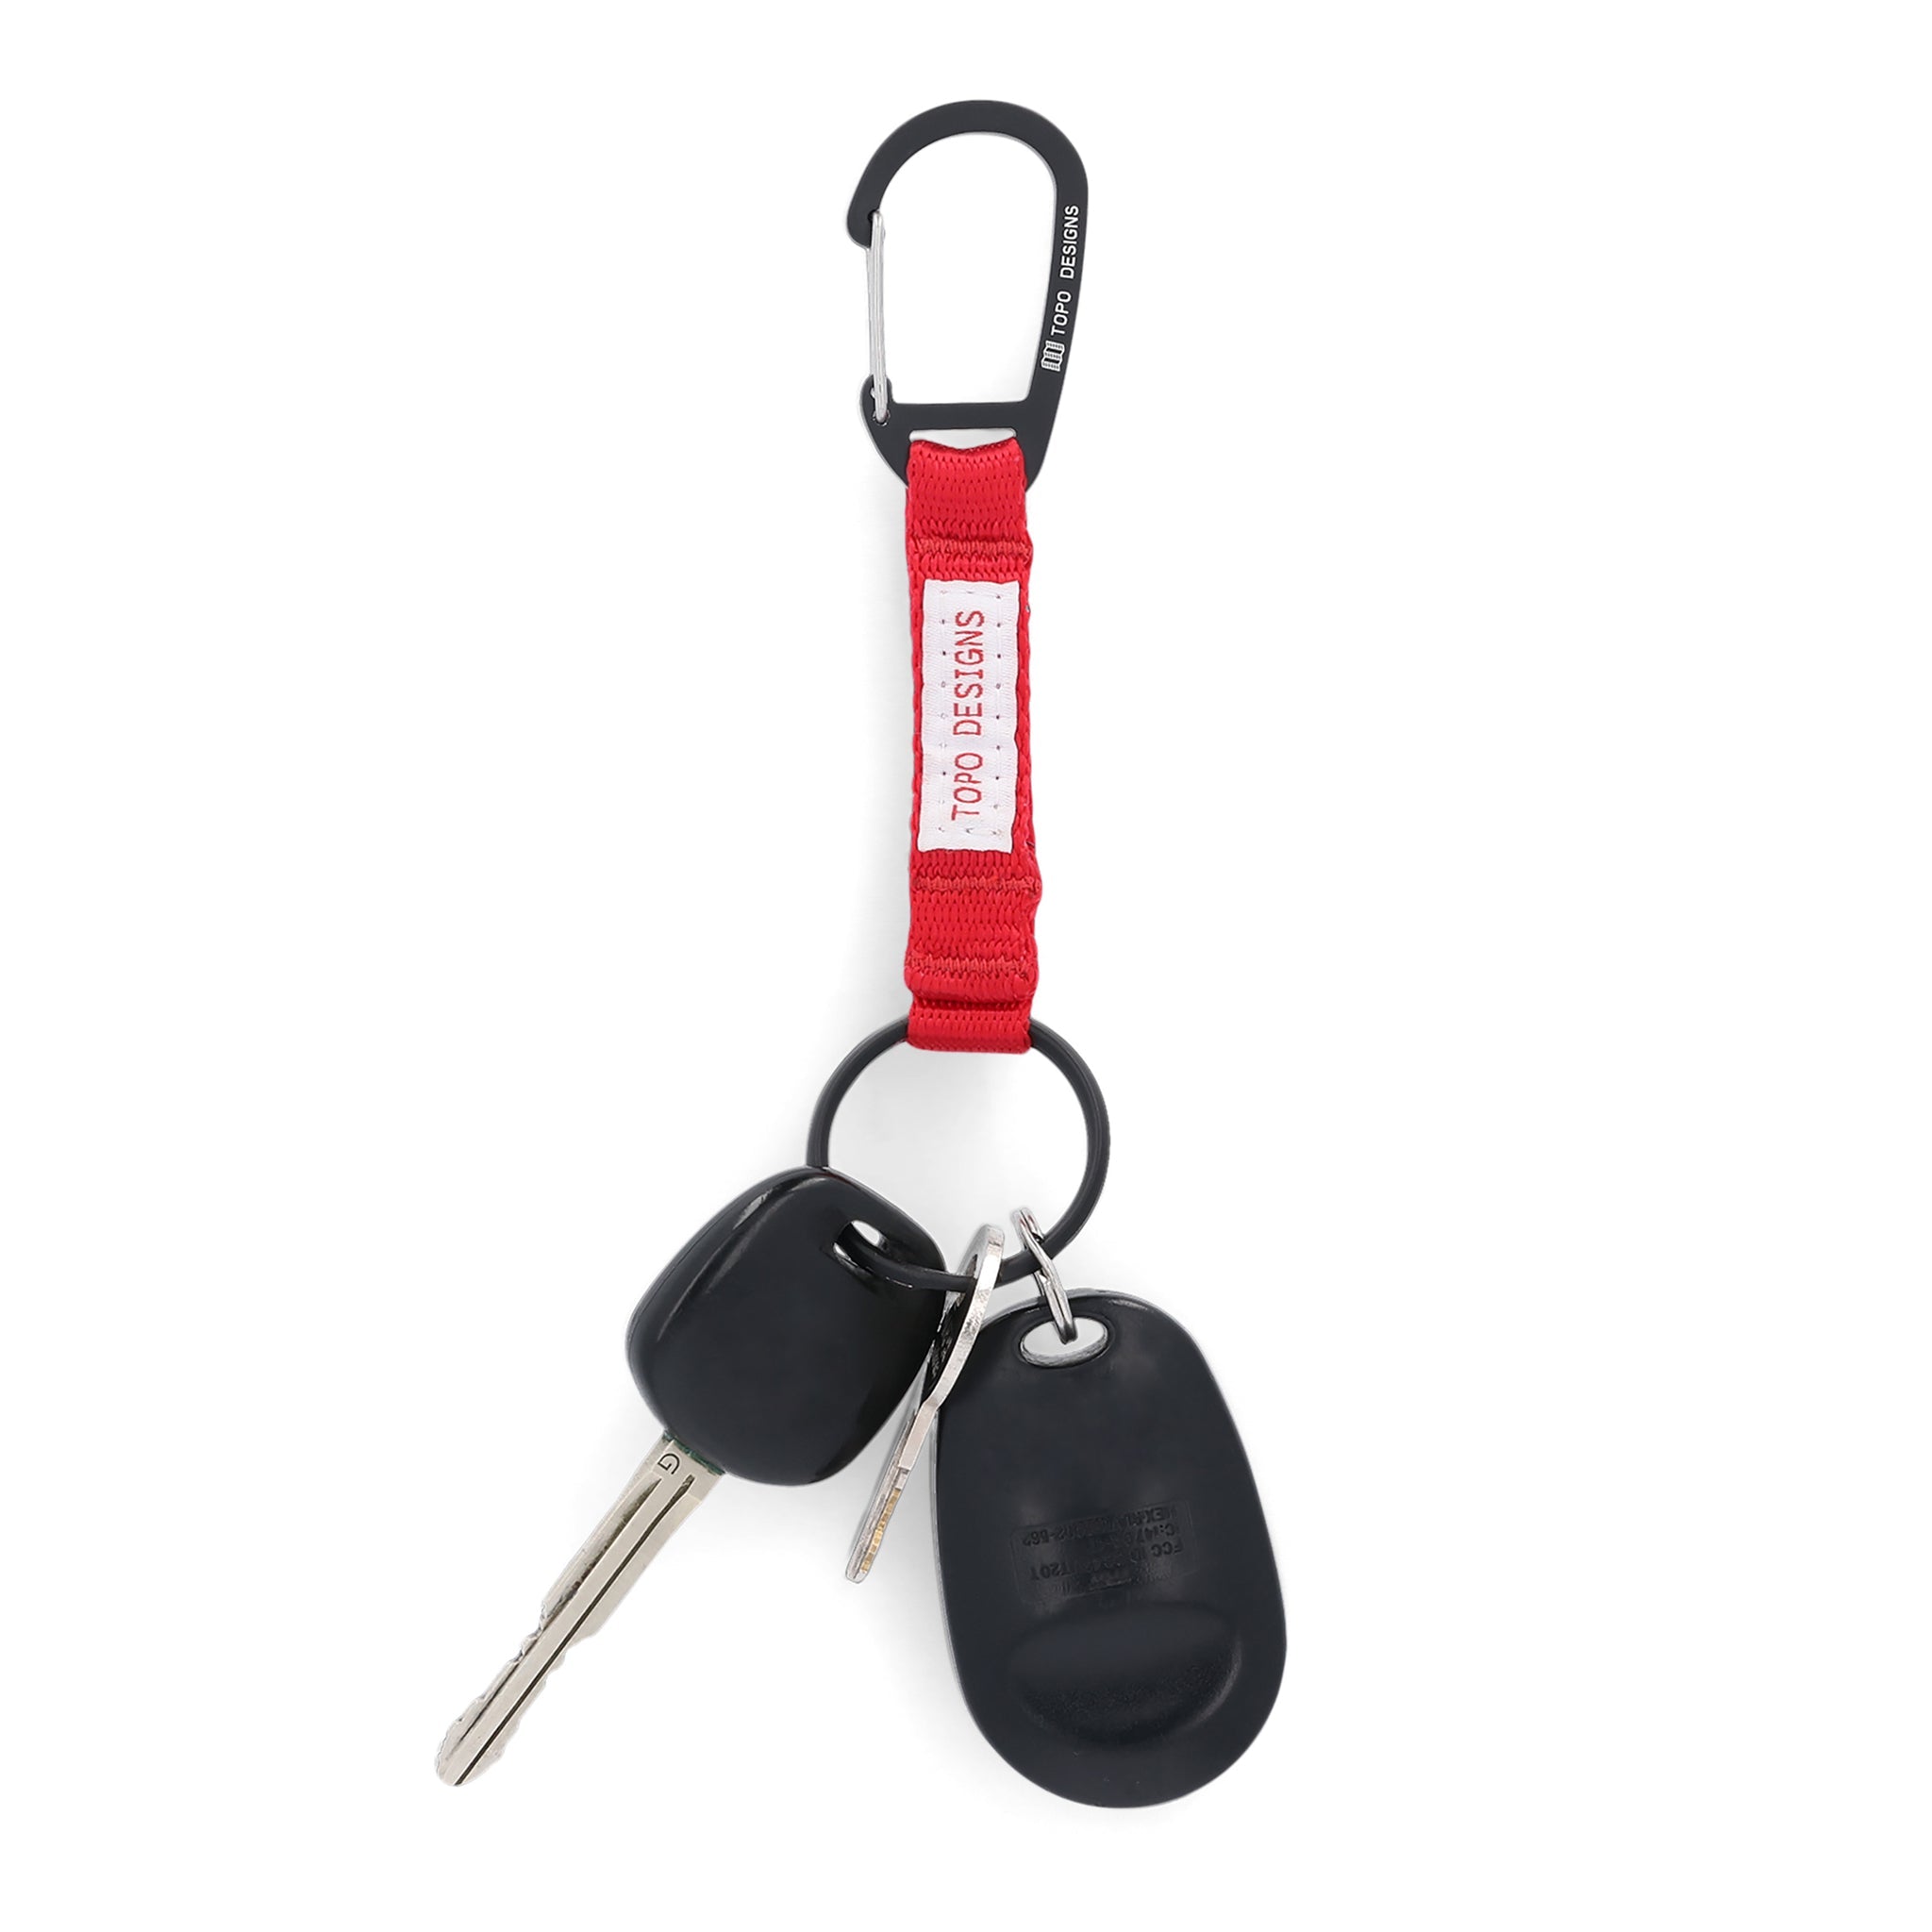 Topo Designs Key Clip carabiner keychain in Red with car keys and fab on ring.